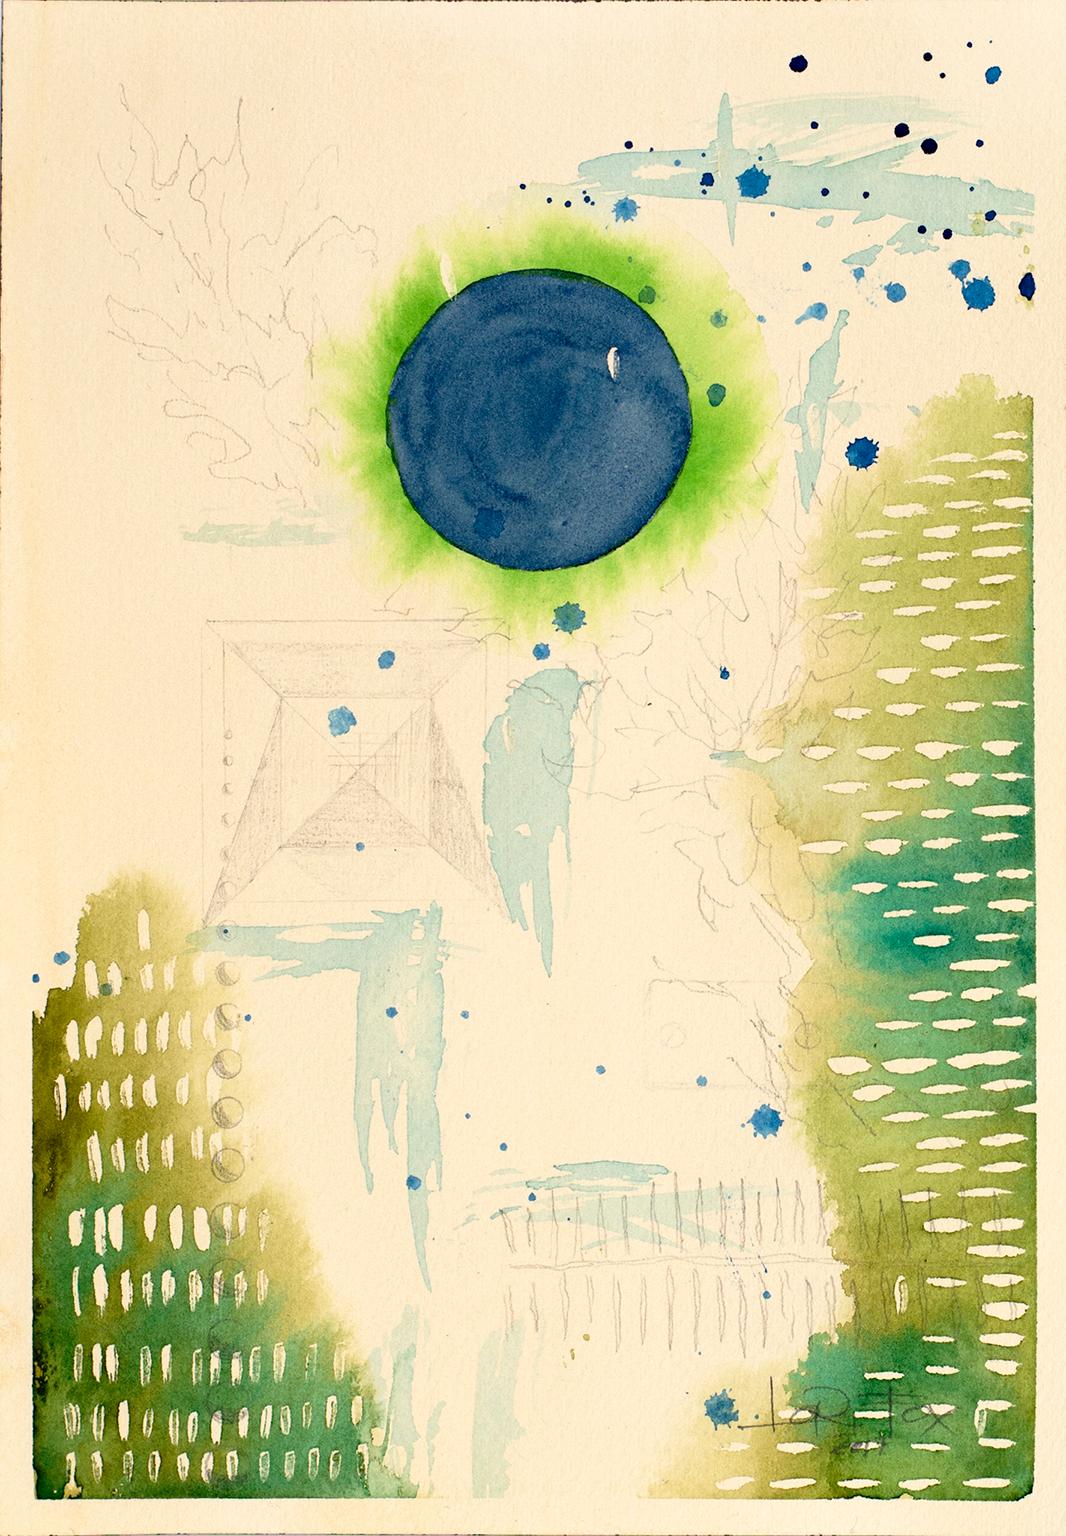 Green Universe, 2017 by Lori Fox
Watercolor and graphite on paper
10.35 x 7.125 inch 
Unframed Original

This series explores the reflection of our third dimensional world through the 3 colors our eyes are programmed to see: red, green, and blue. 